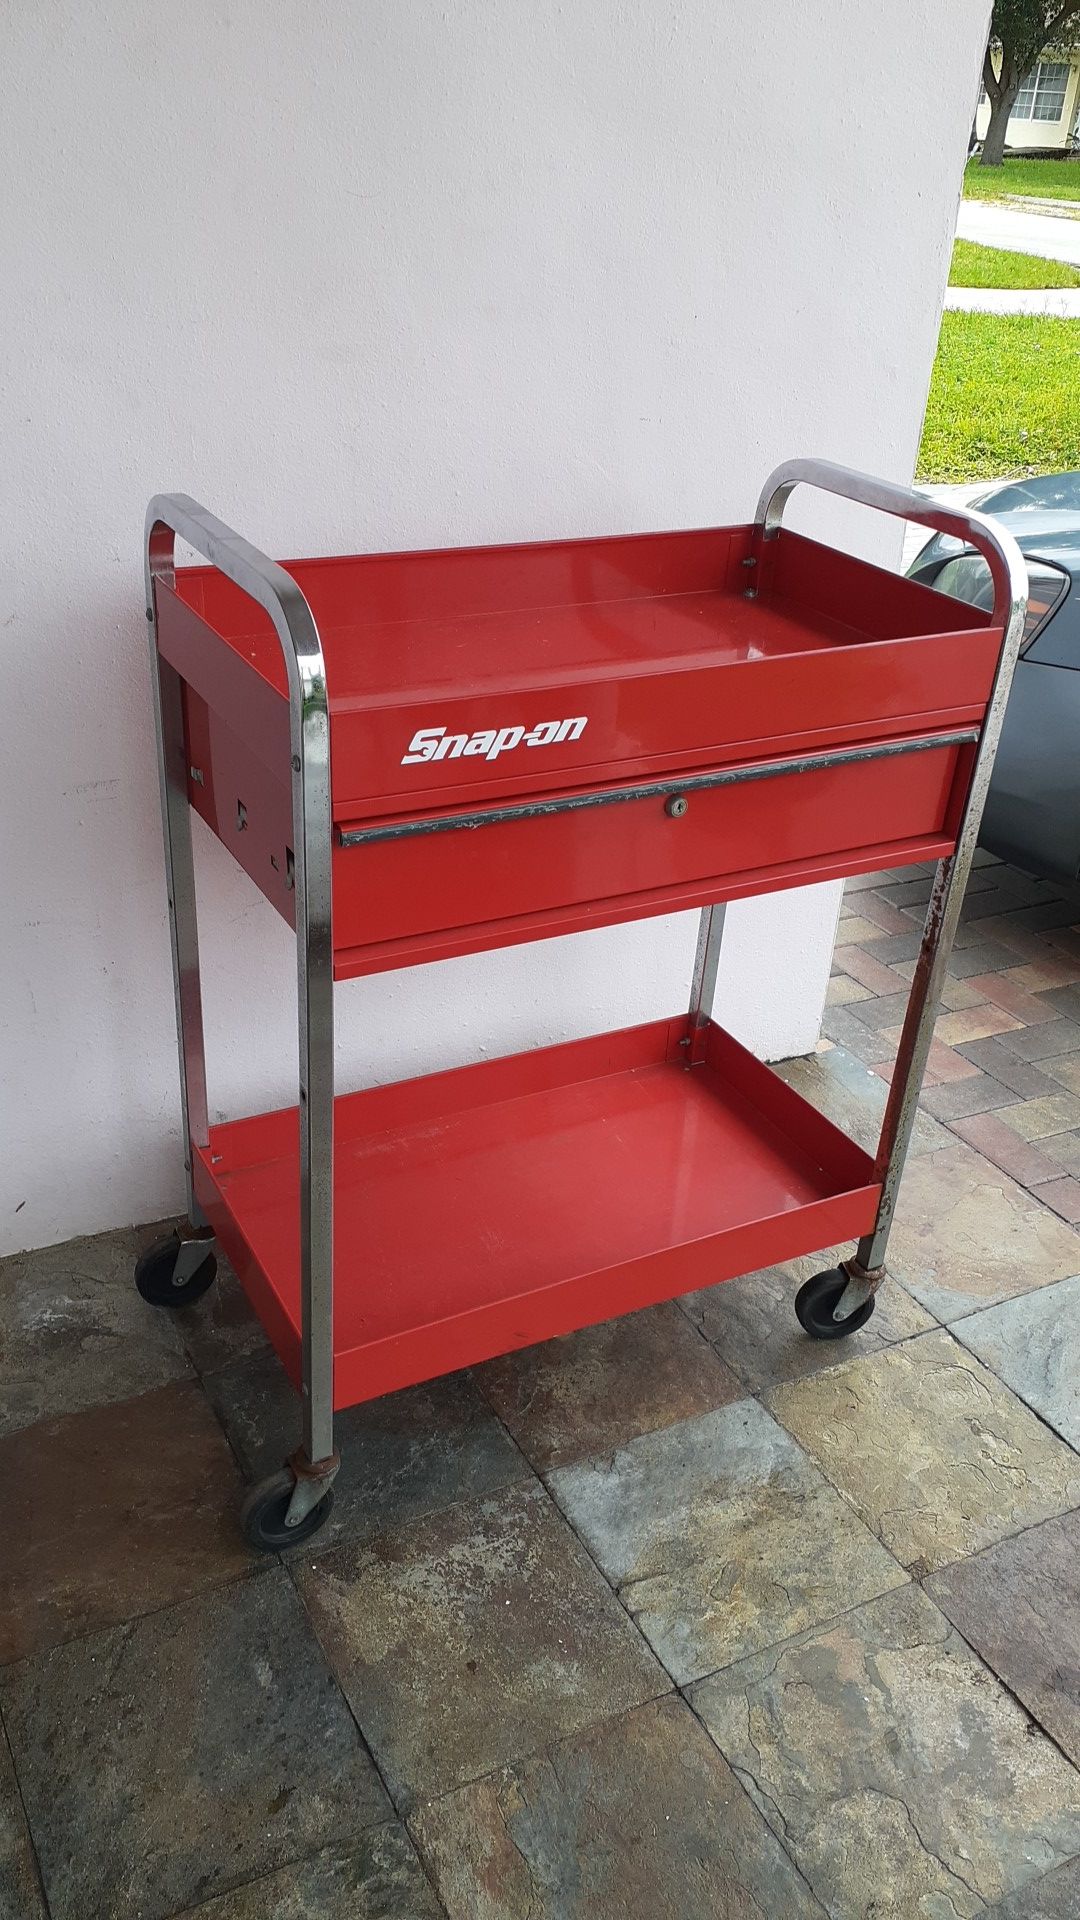 SNAP ON KRBC3TD ROLL TOOL CART "LIKE NEW" NO OFFERS, PRICE IS FIRM